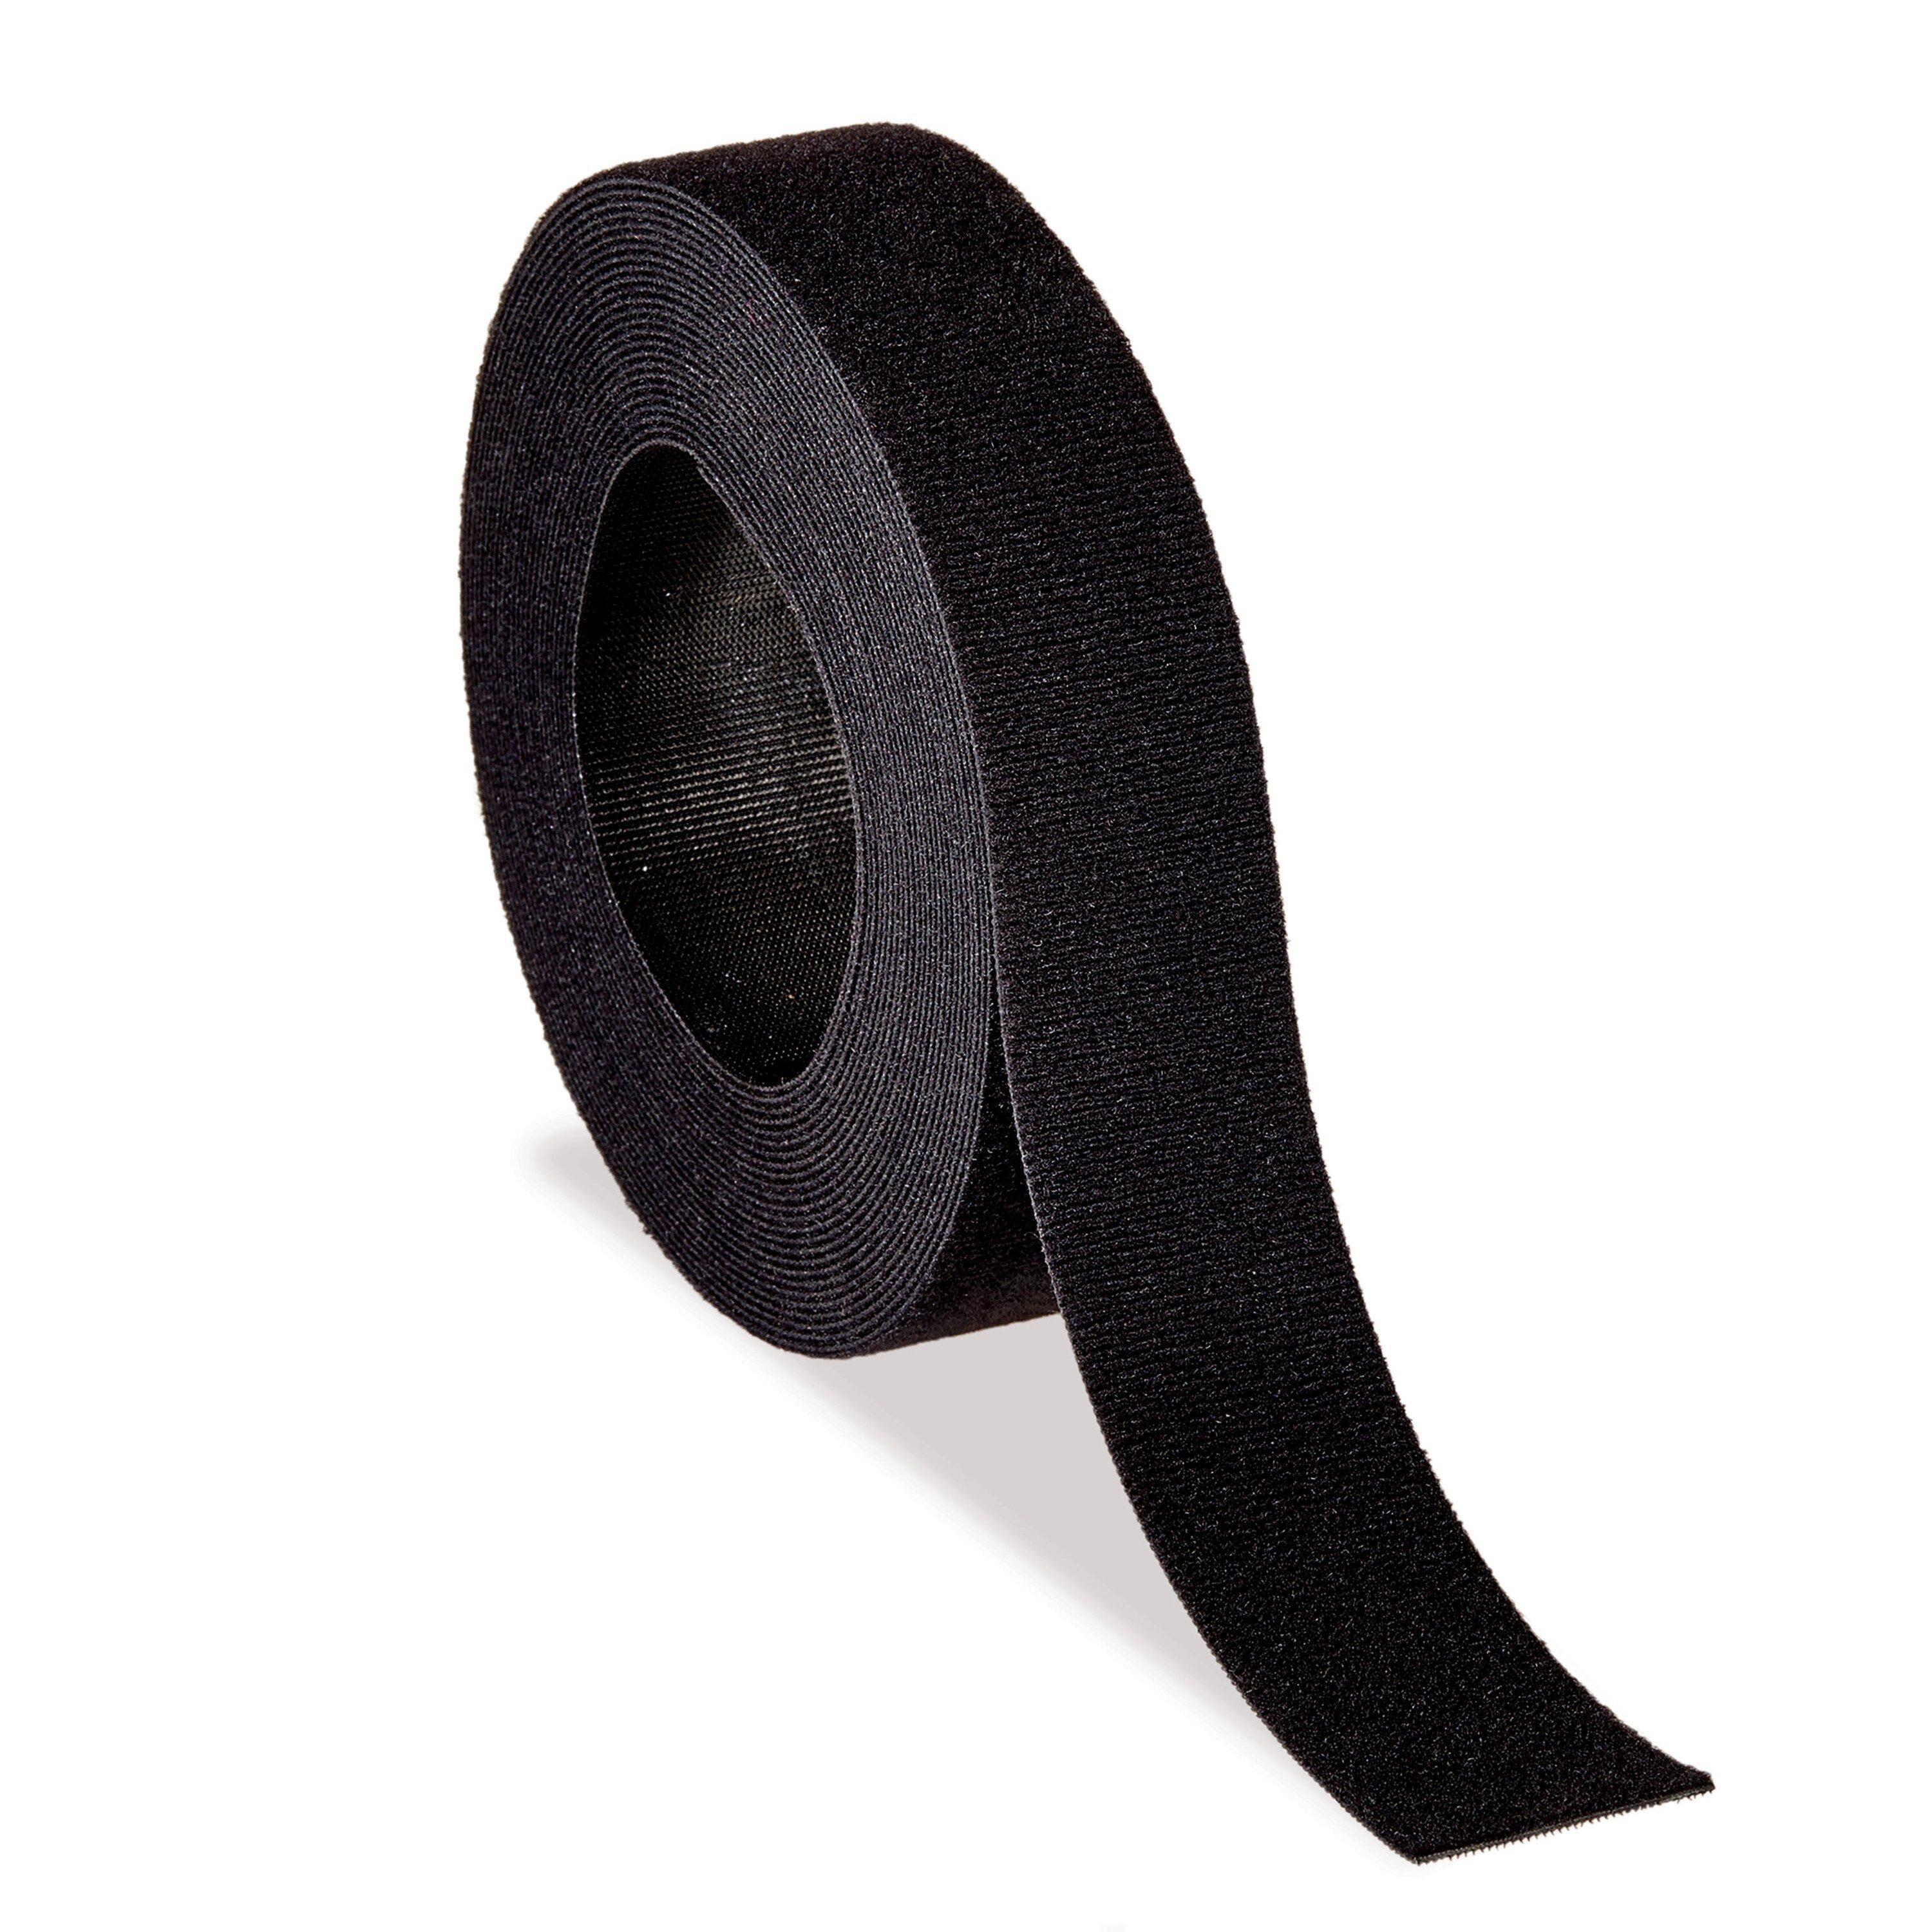 VELCRO Brand Sticky Back 15ft x 3/4in Roll Black 180-in Hook and